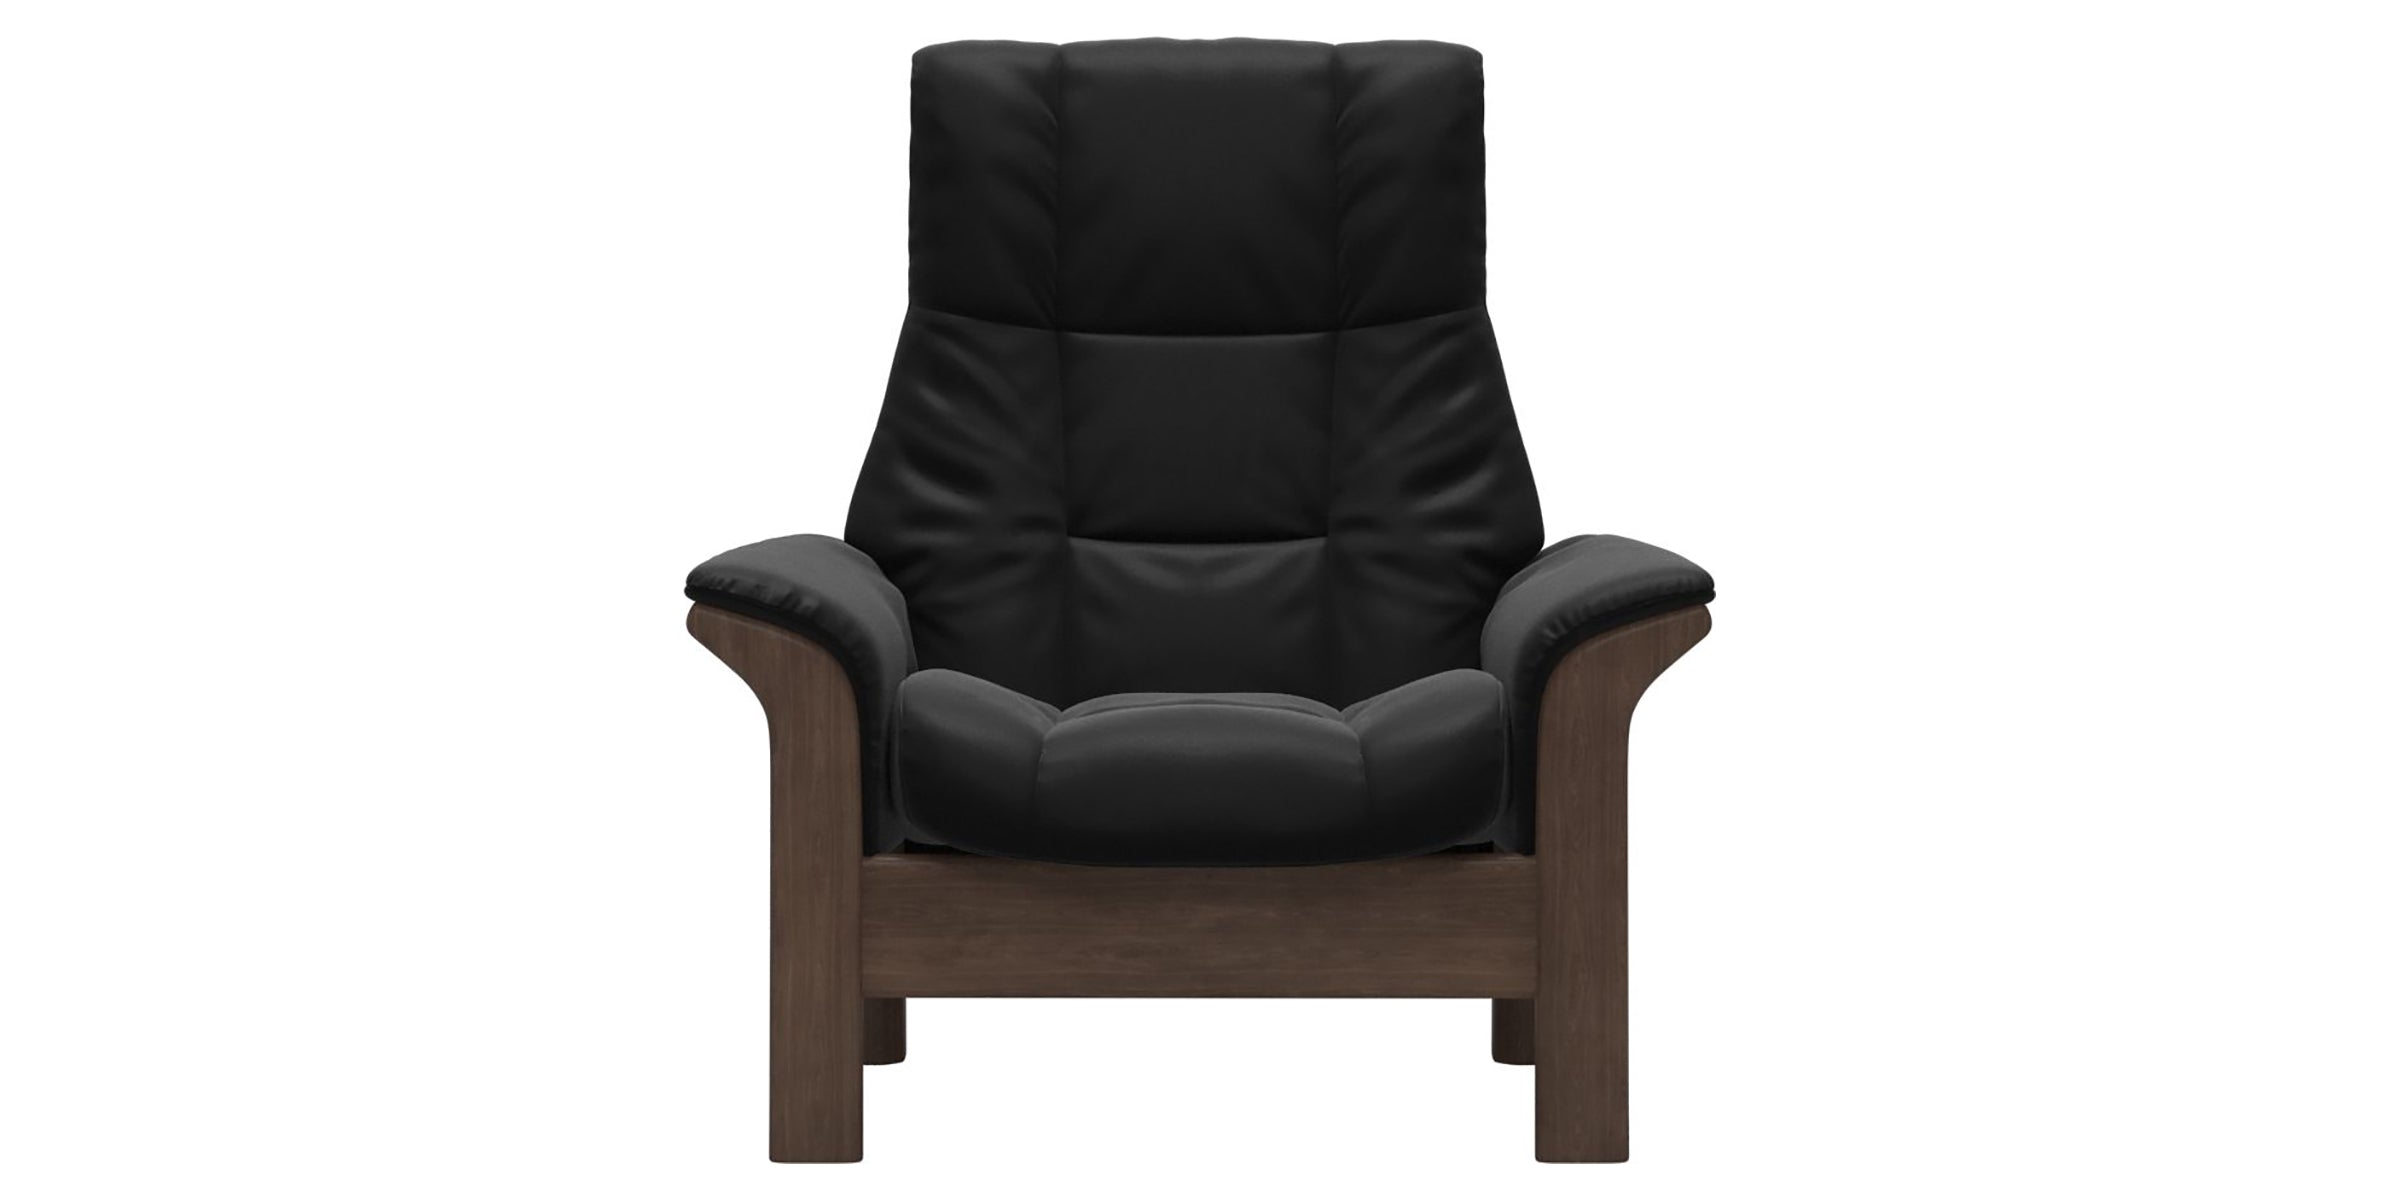 Paloma Leather Black and Walnut Base | Stressless Windsor High Back Chair | Valley Ridge Furniture